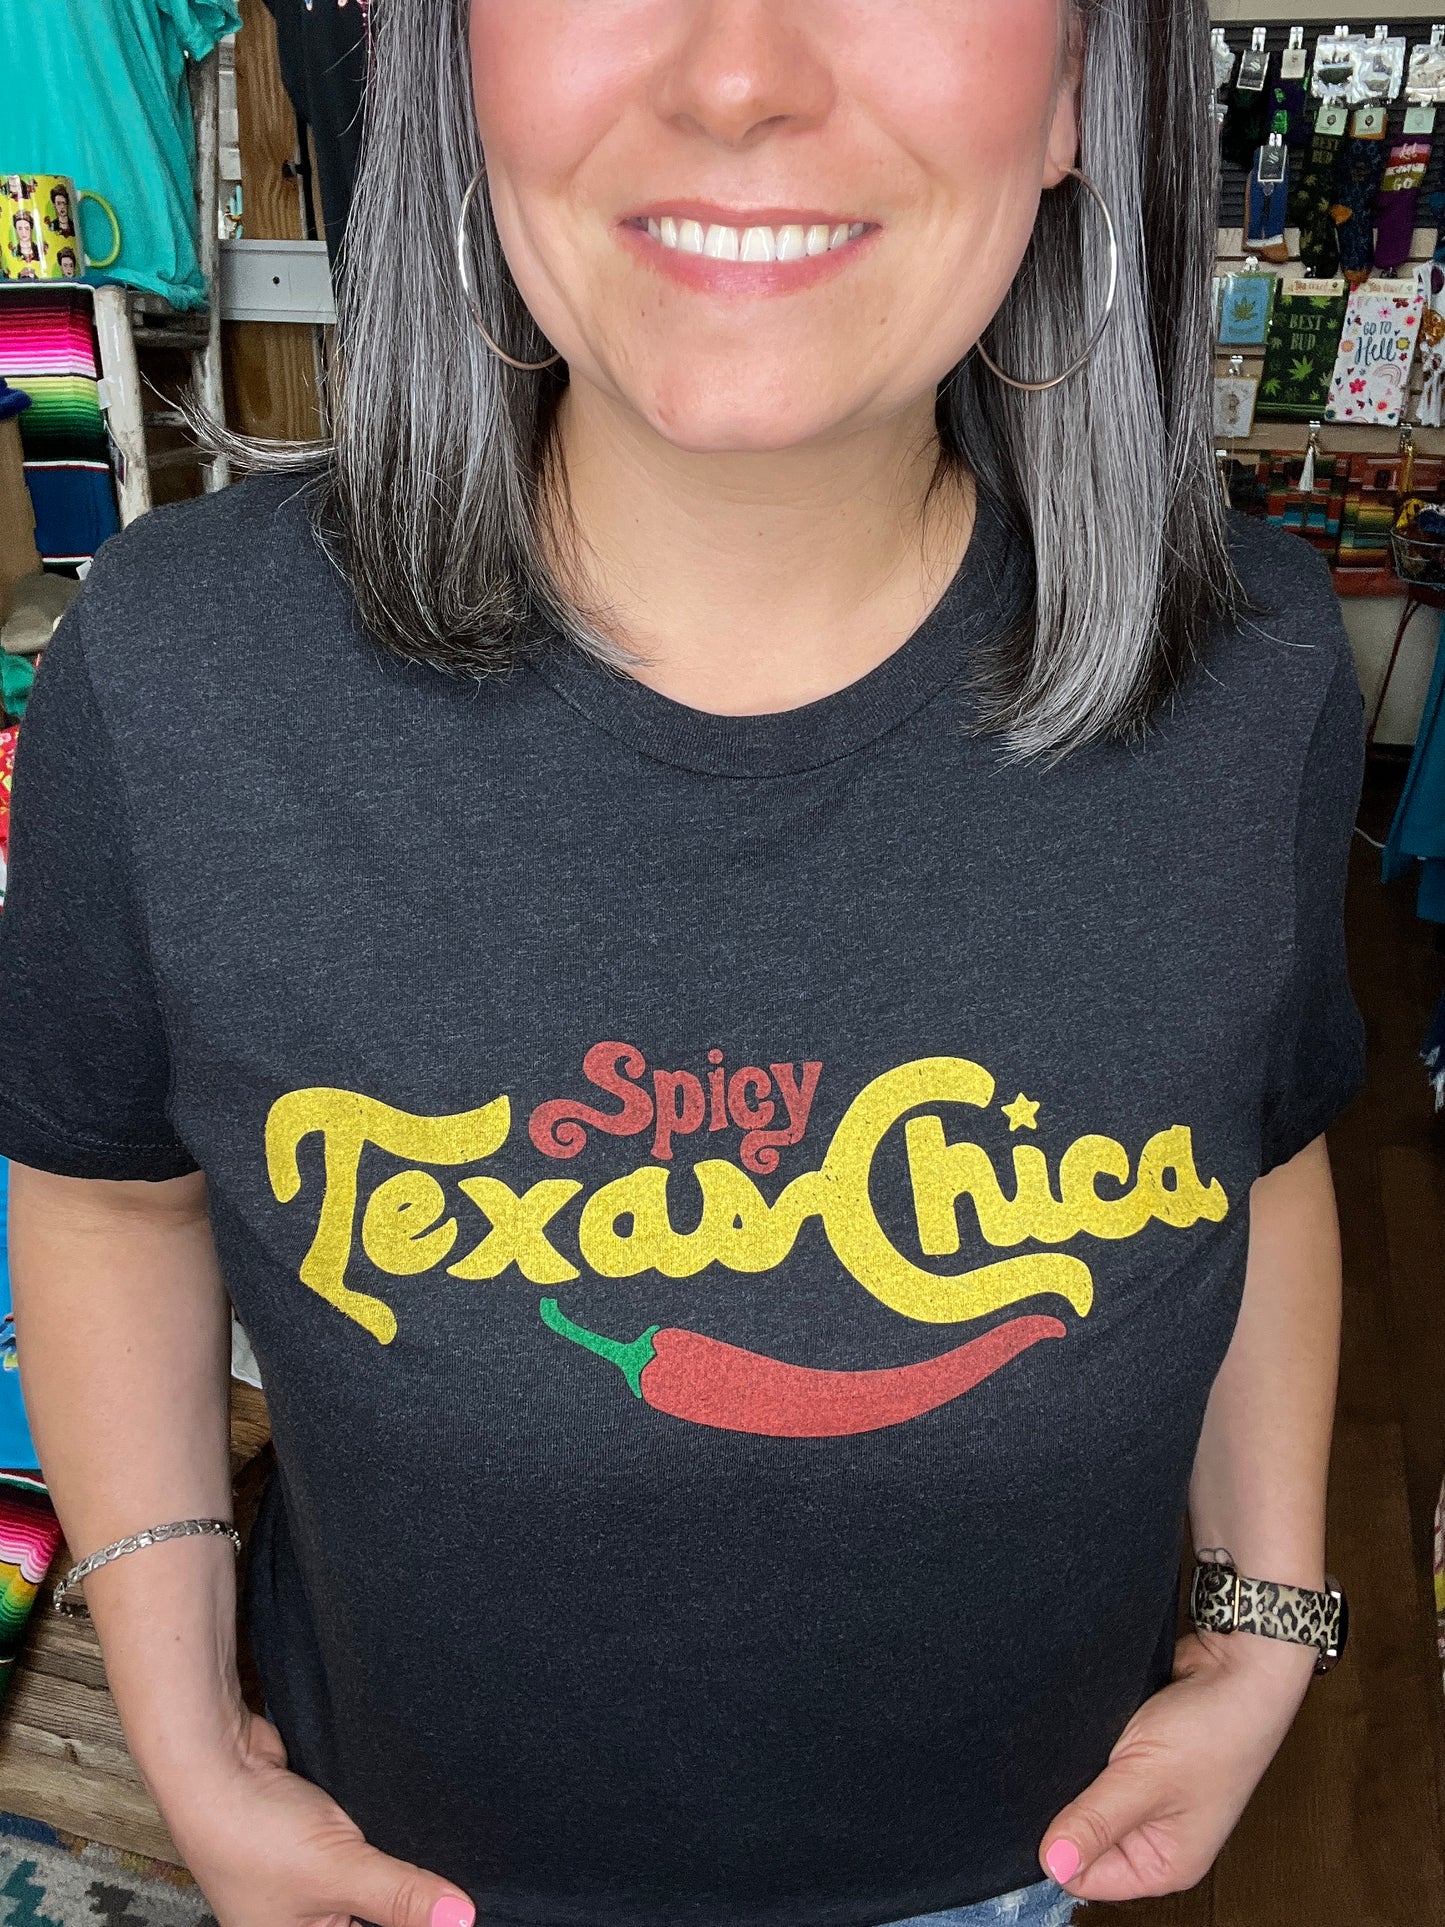 Spicy Texas Chica Tee